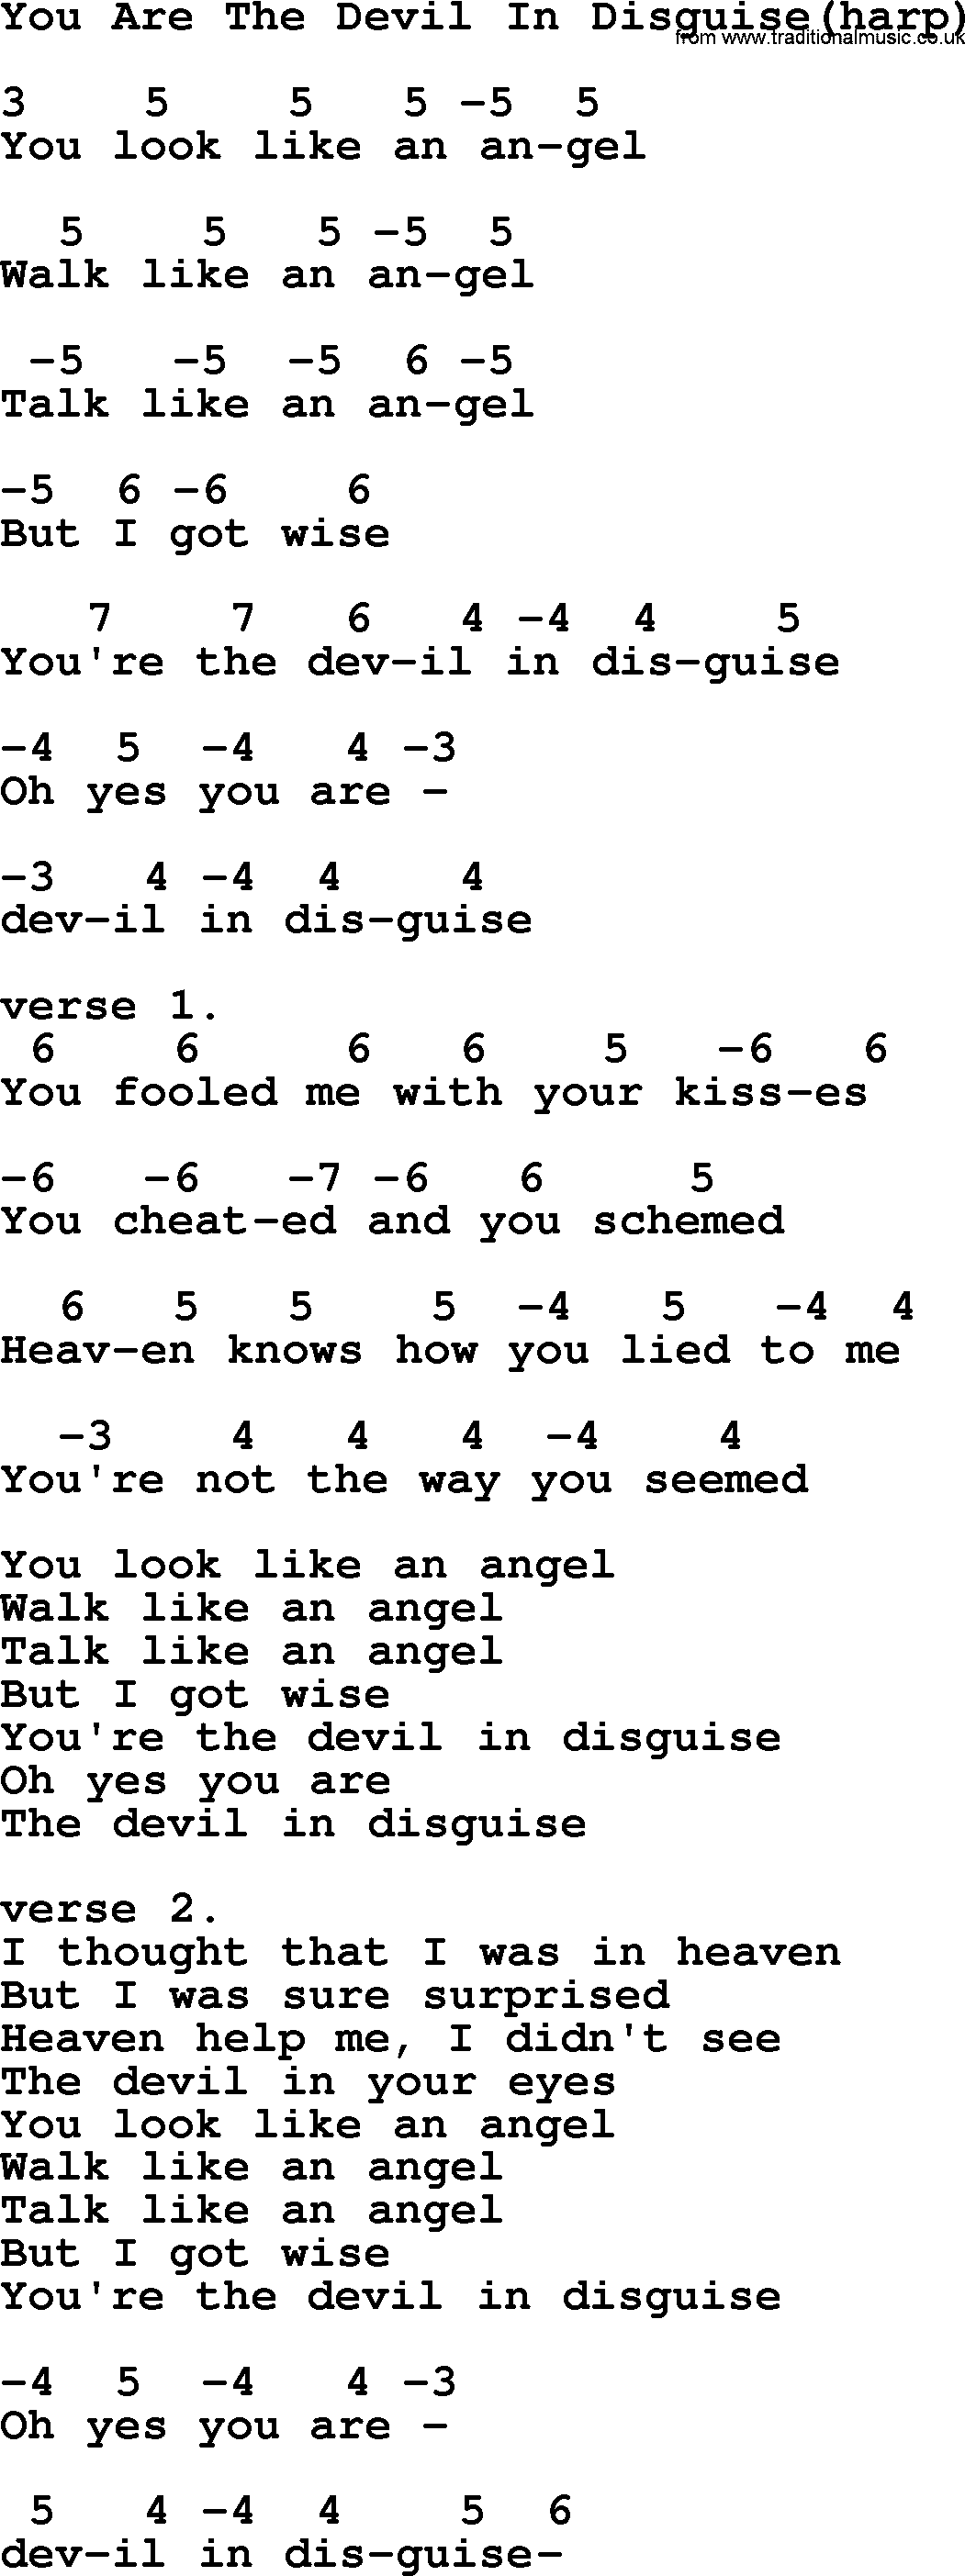 Elvis Presley song: You Are The Devil In Disguise(harp), lyrics and chords